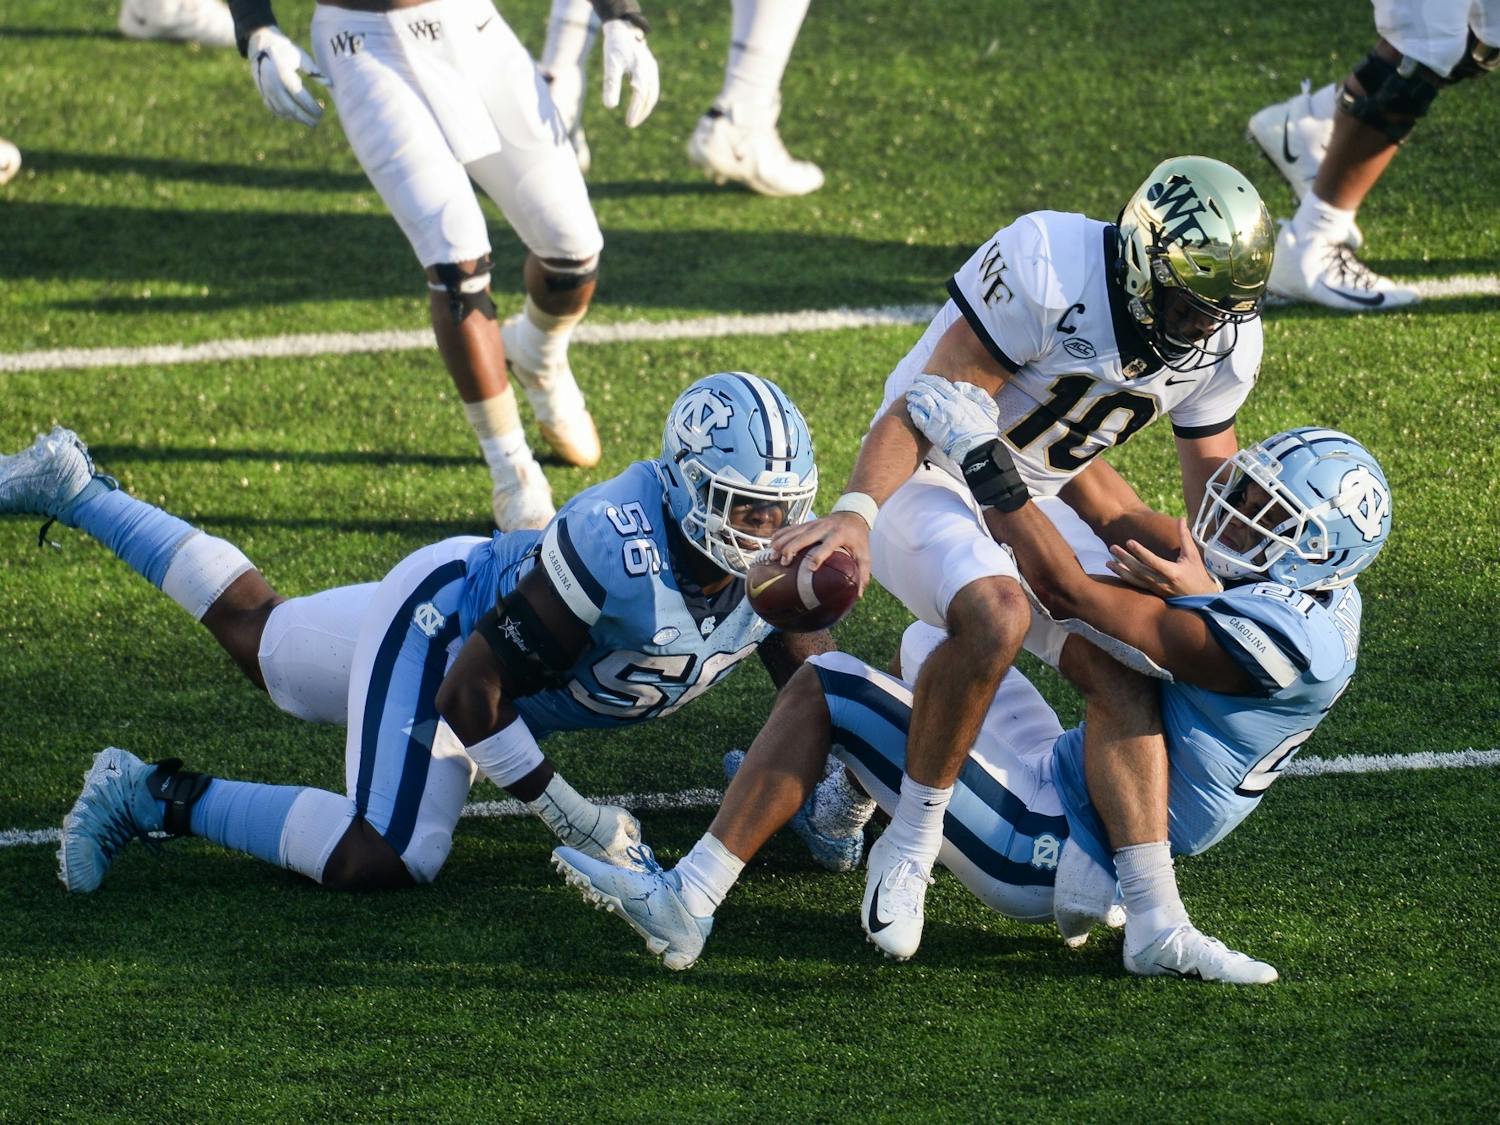 Wake Forest's redshirt sophomore quarterback Sam Hartman (10) is sacked by UNC's graduate linebacker Chazz Surratt (21) and sophomore defensive lineman Tomari Fox (56) during a game in Kenan Memorial Stadium on Saturday, Nov. 14, 2020. UNC beat Wake Forest 59-53.